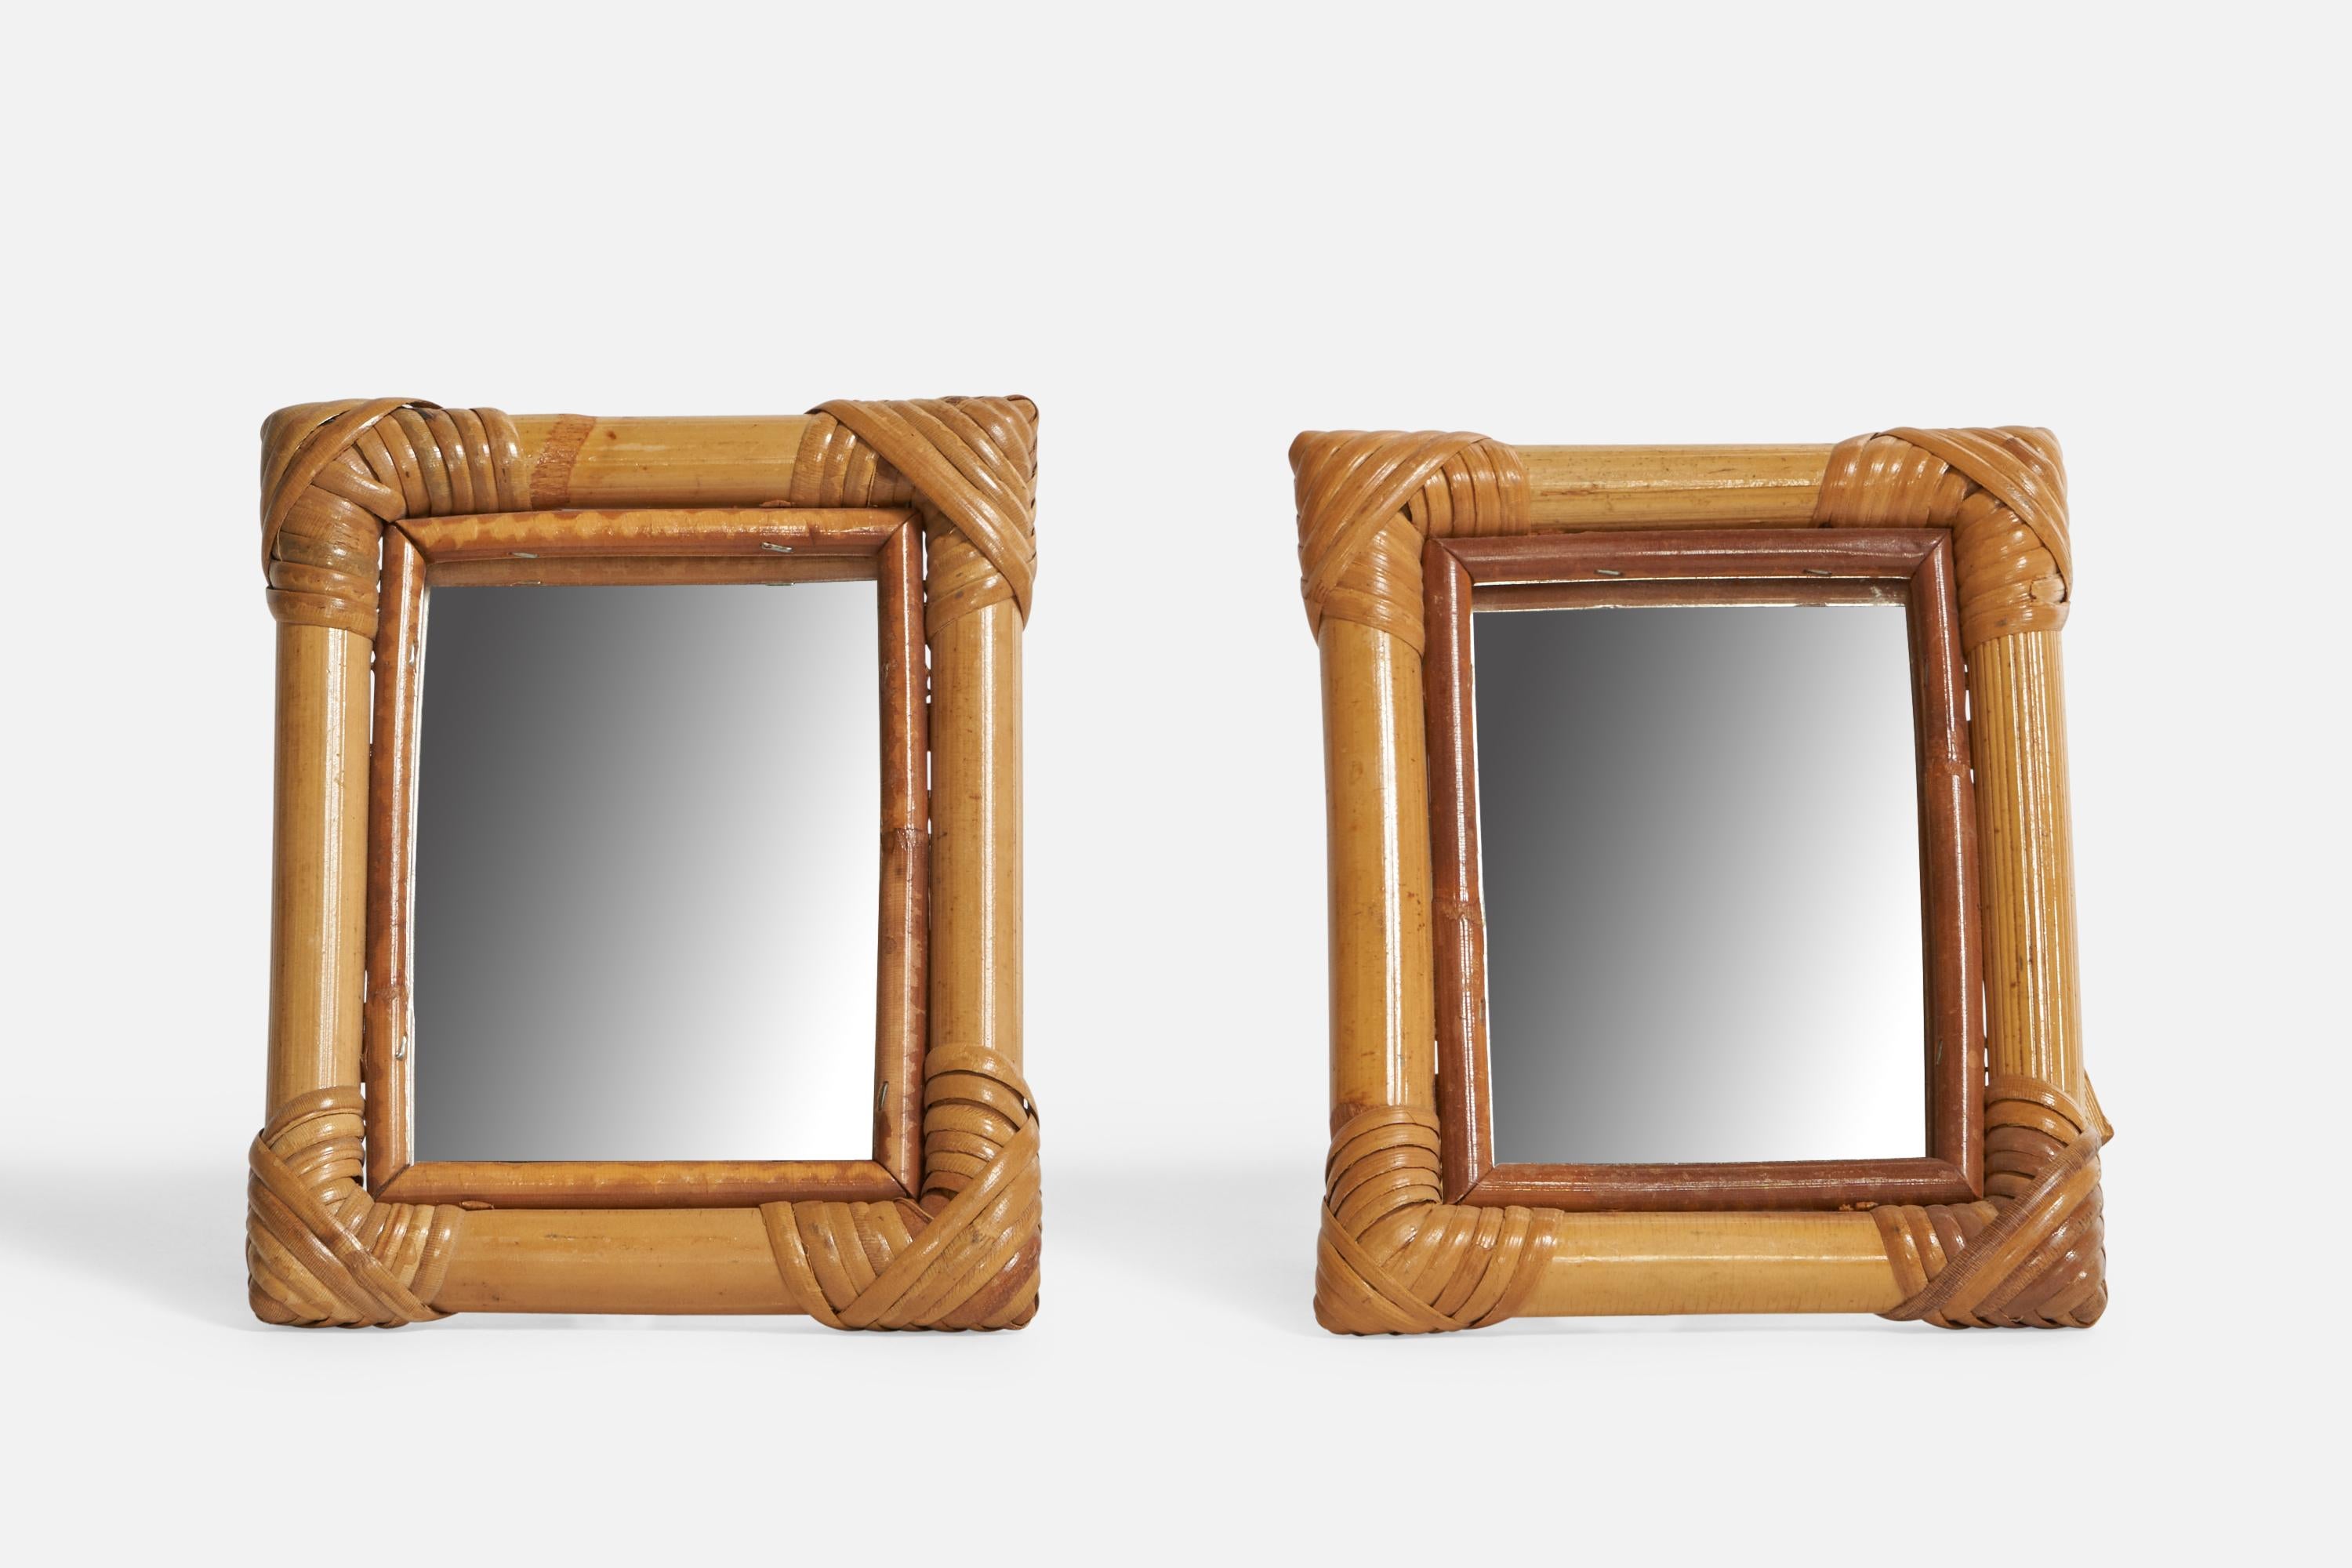 A pair of bamboo and rattan table mirrors designed and produced in Italy, 1970s.